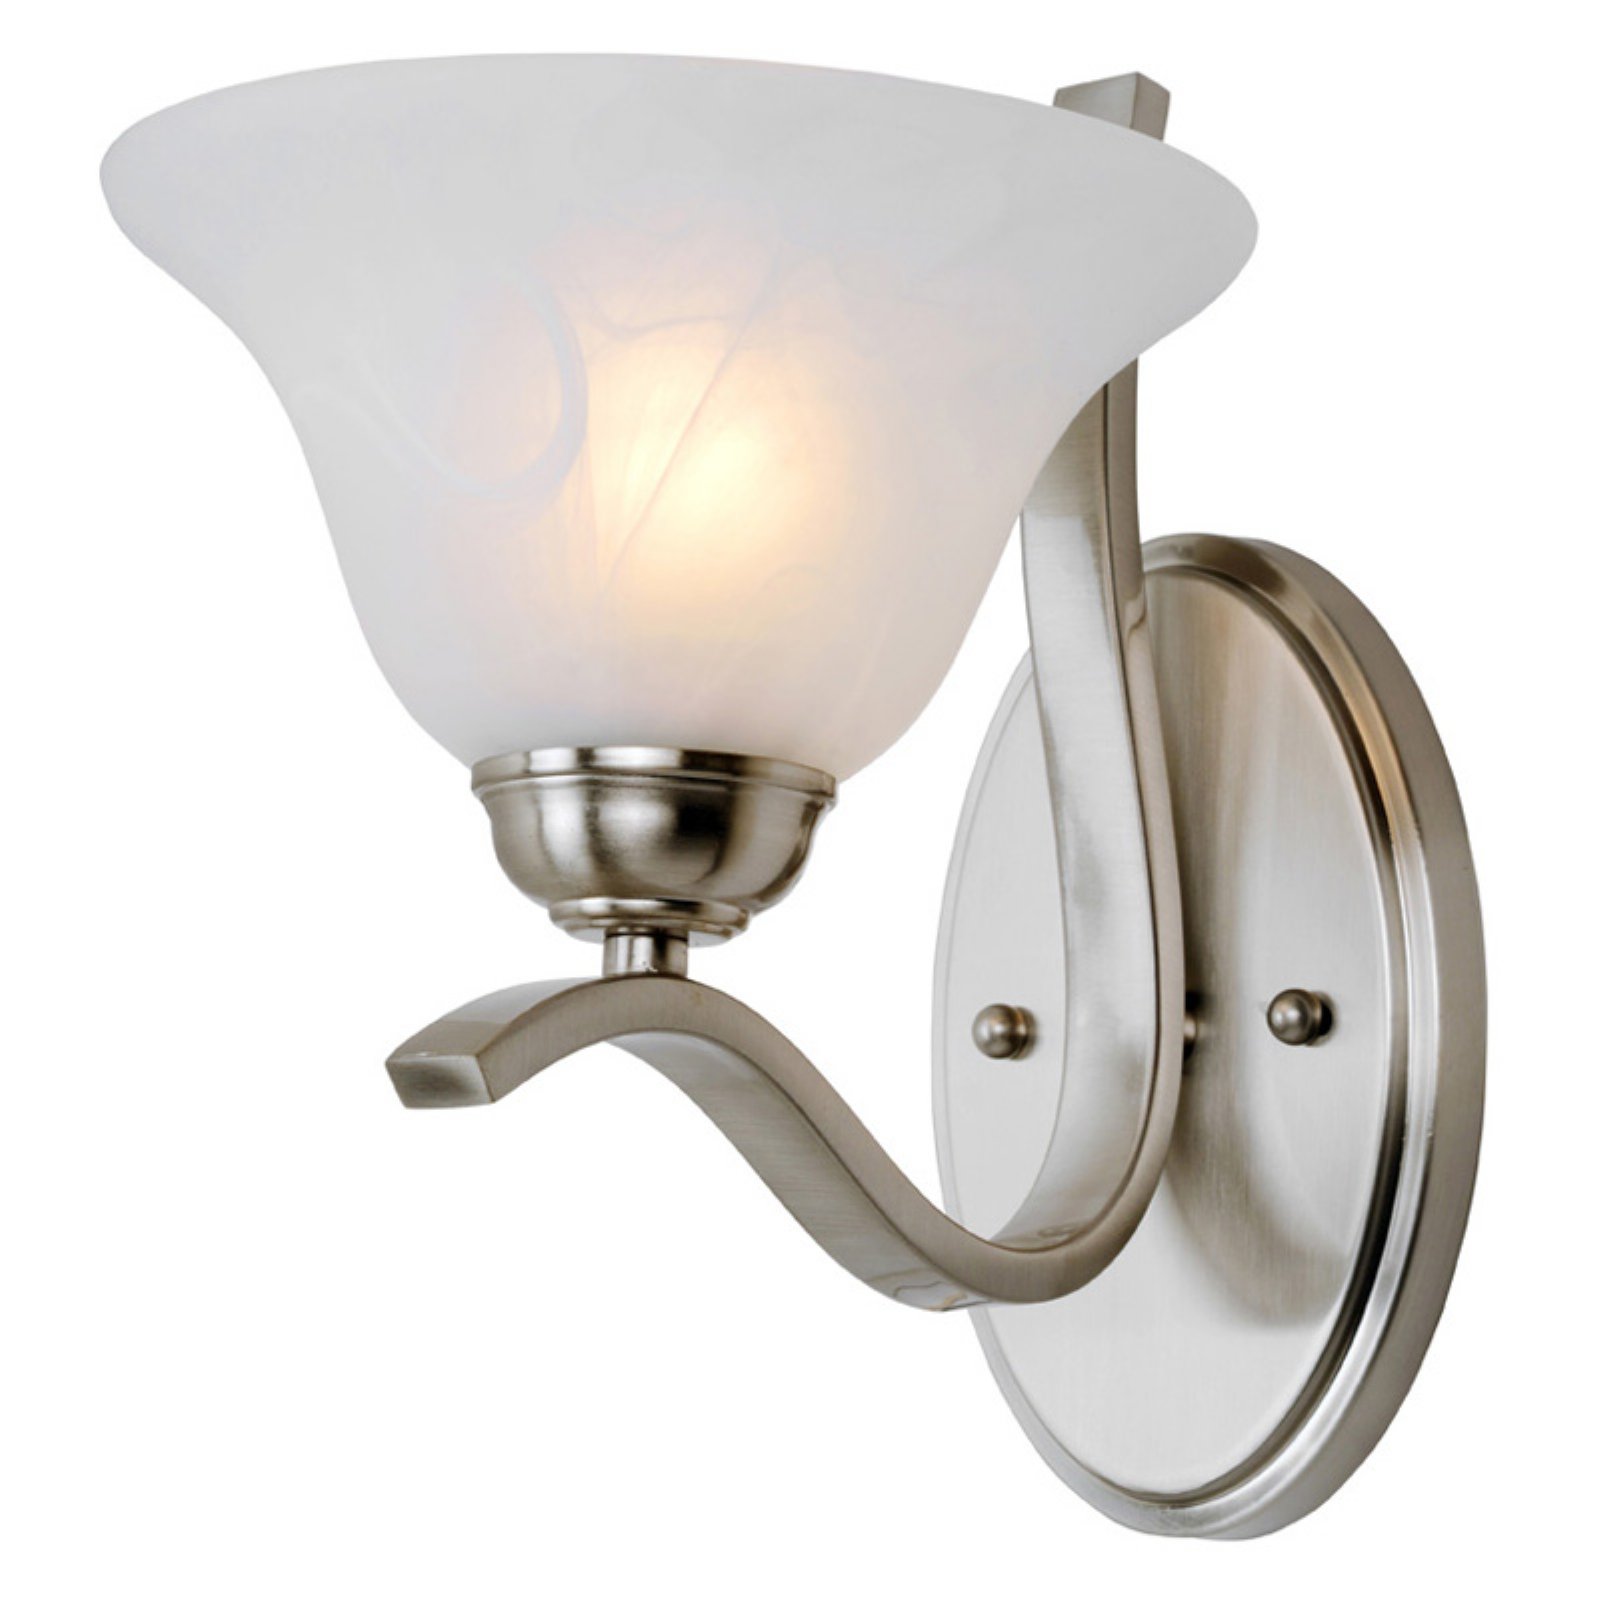 2825 BN-Trans Globe Lighting-One Light Wall Sconce-Brushed Nickel Finish - image 2 of 2